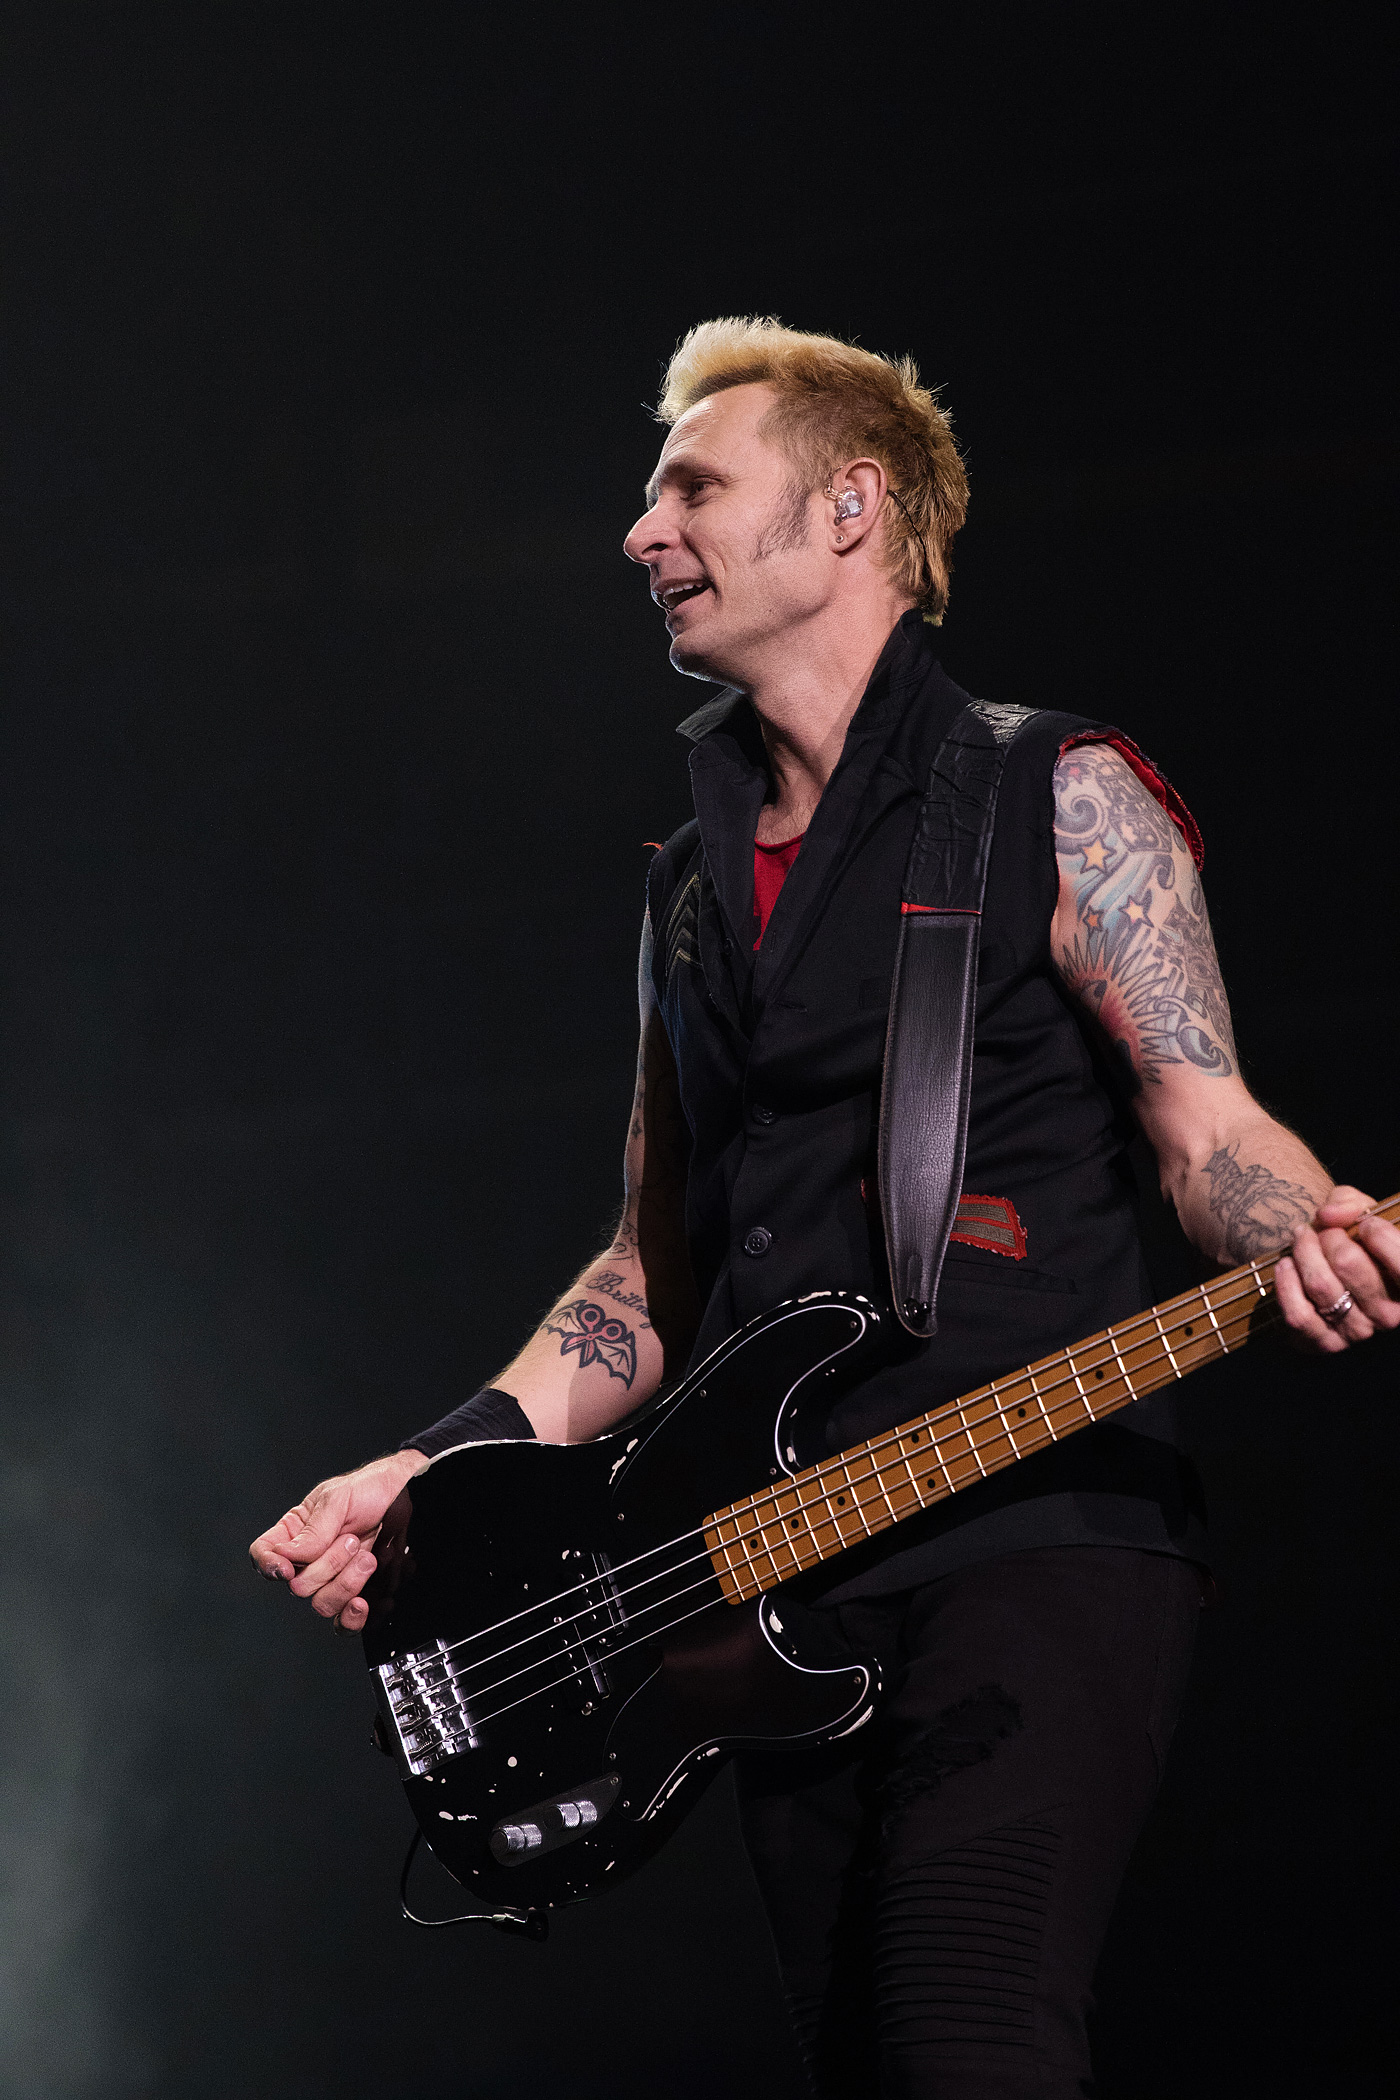 Green Day & Against Me concert photos from Denver 1st Bank Center, 2017